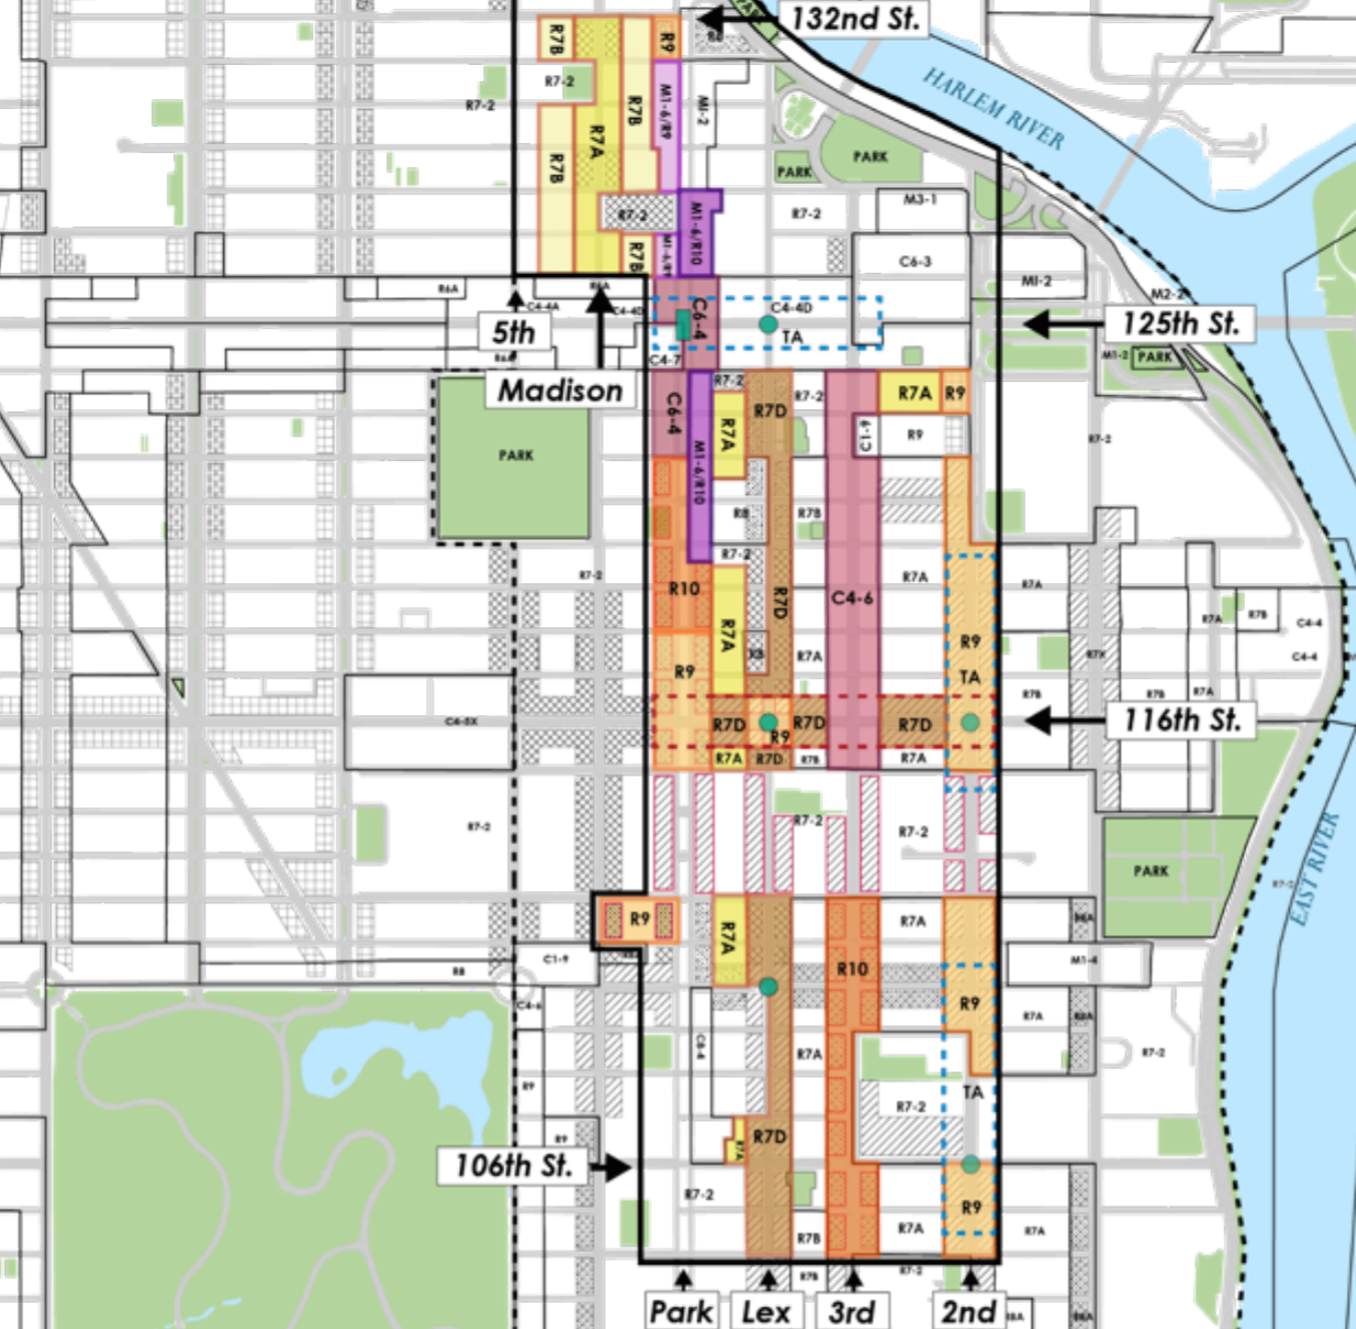 Proposed zoning for East Harlem, map via DCP